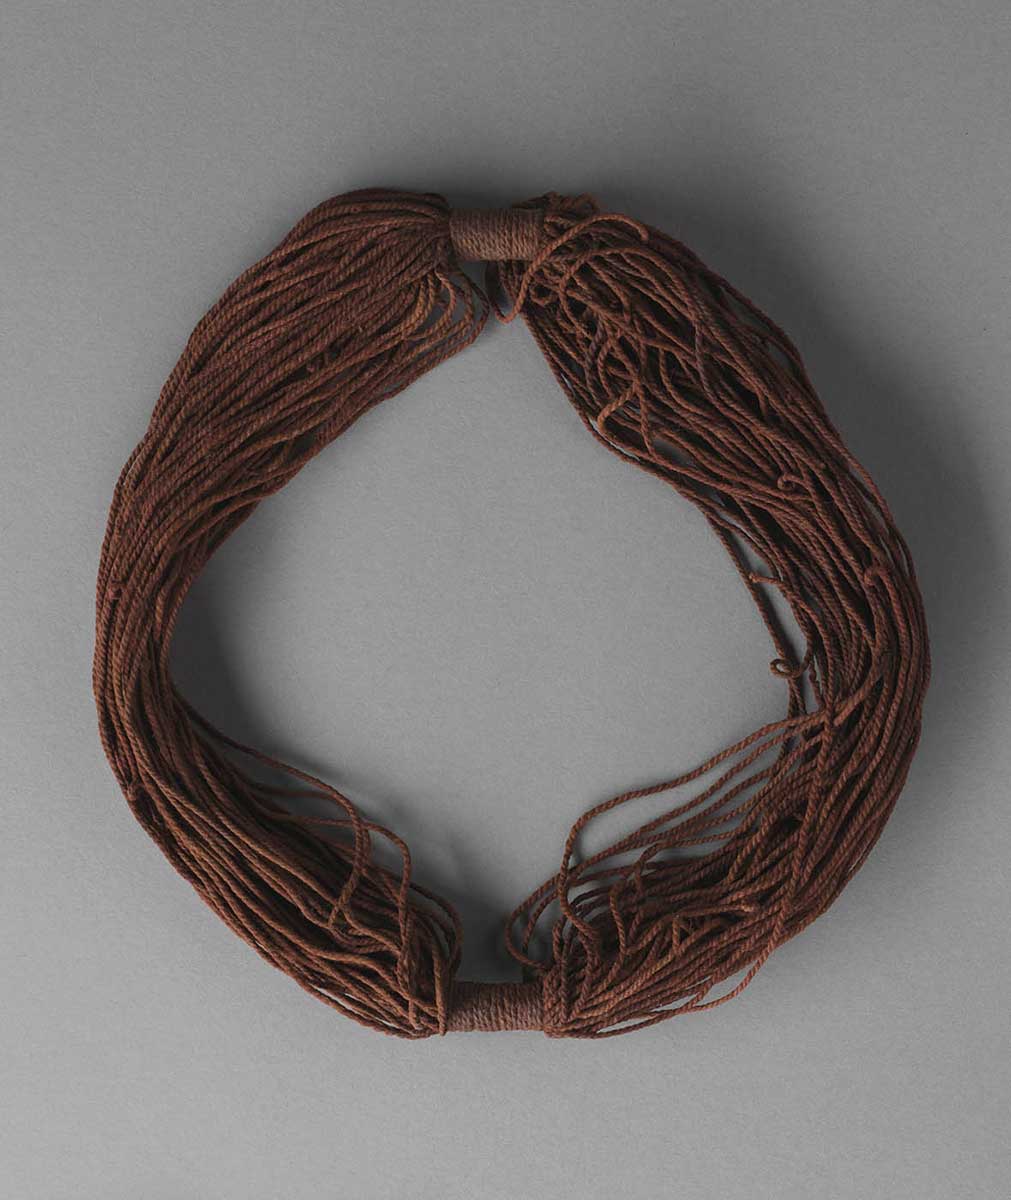 A headband, made up of multiple strands of brown-pigmented two-ply natural fibre string. The strands are gathered in at opposite sides of the headband by the same string, tied tightly across the strands. Some of the strands on the right-hand side have small loops in them. - click to view larger image